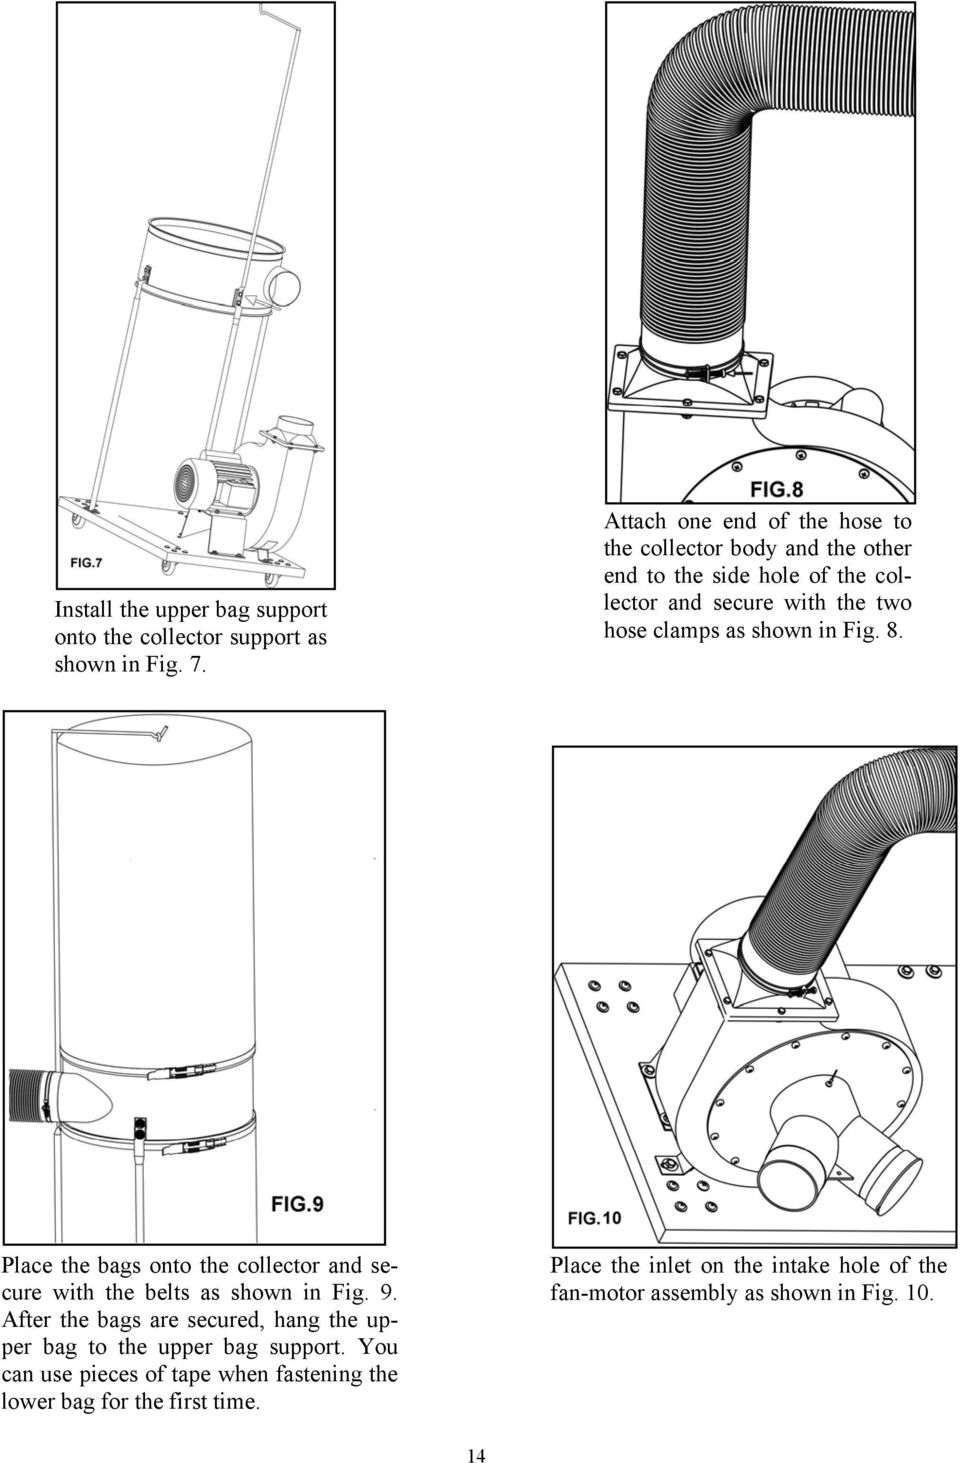 as shown in Fig. 8. Place the bags onto the collector and secure with the belts as shown in Fig. 9.